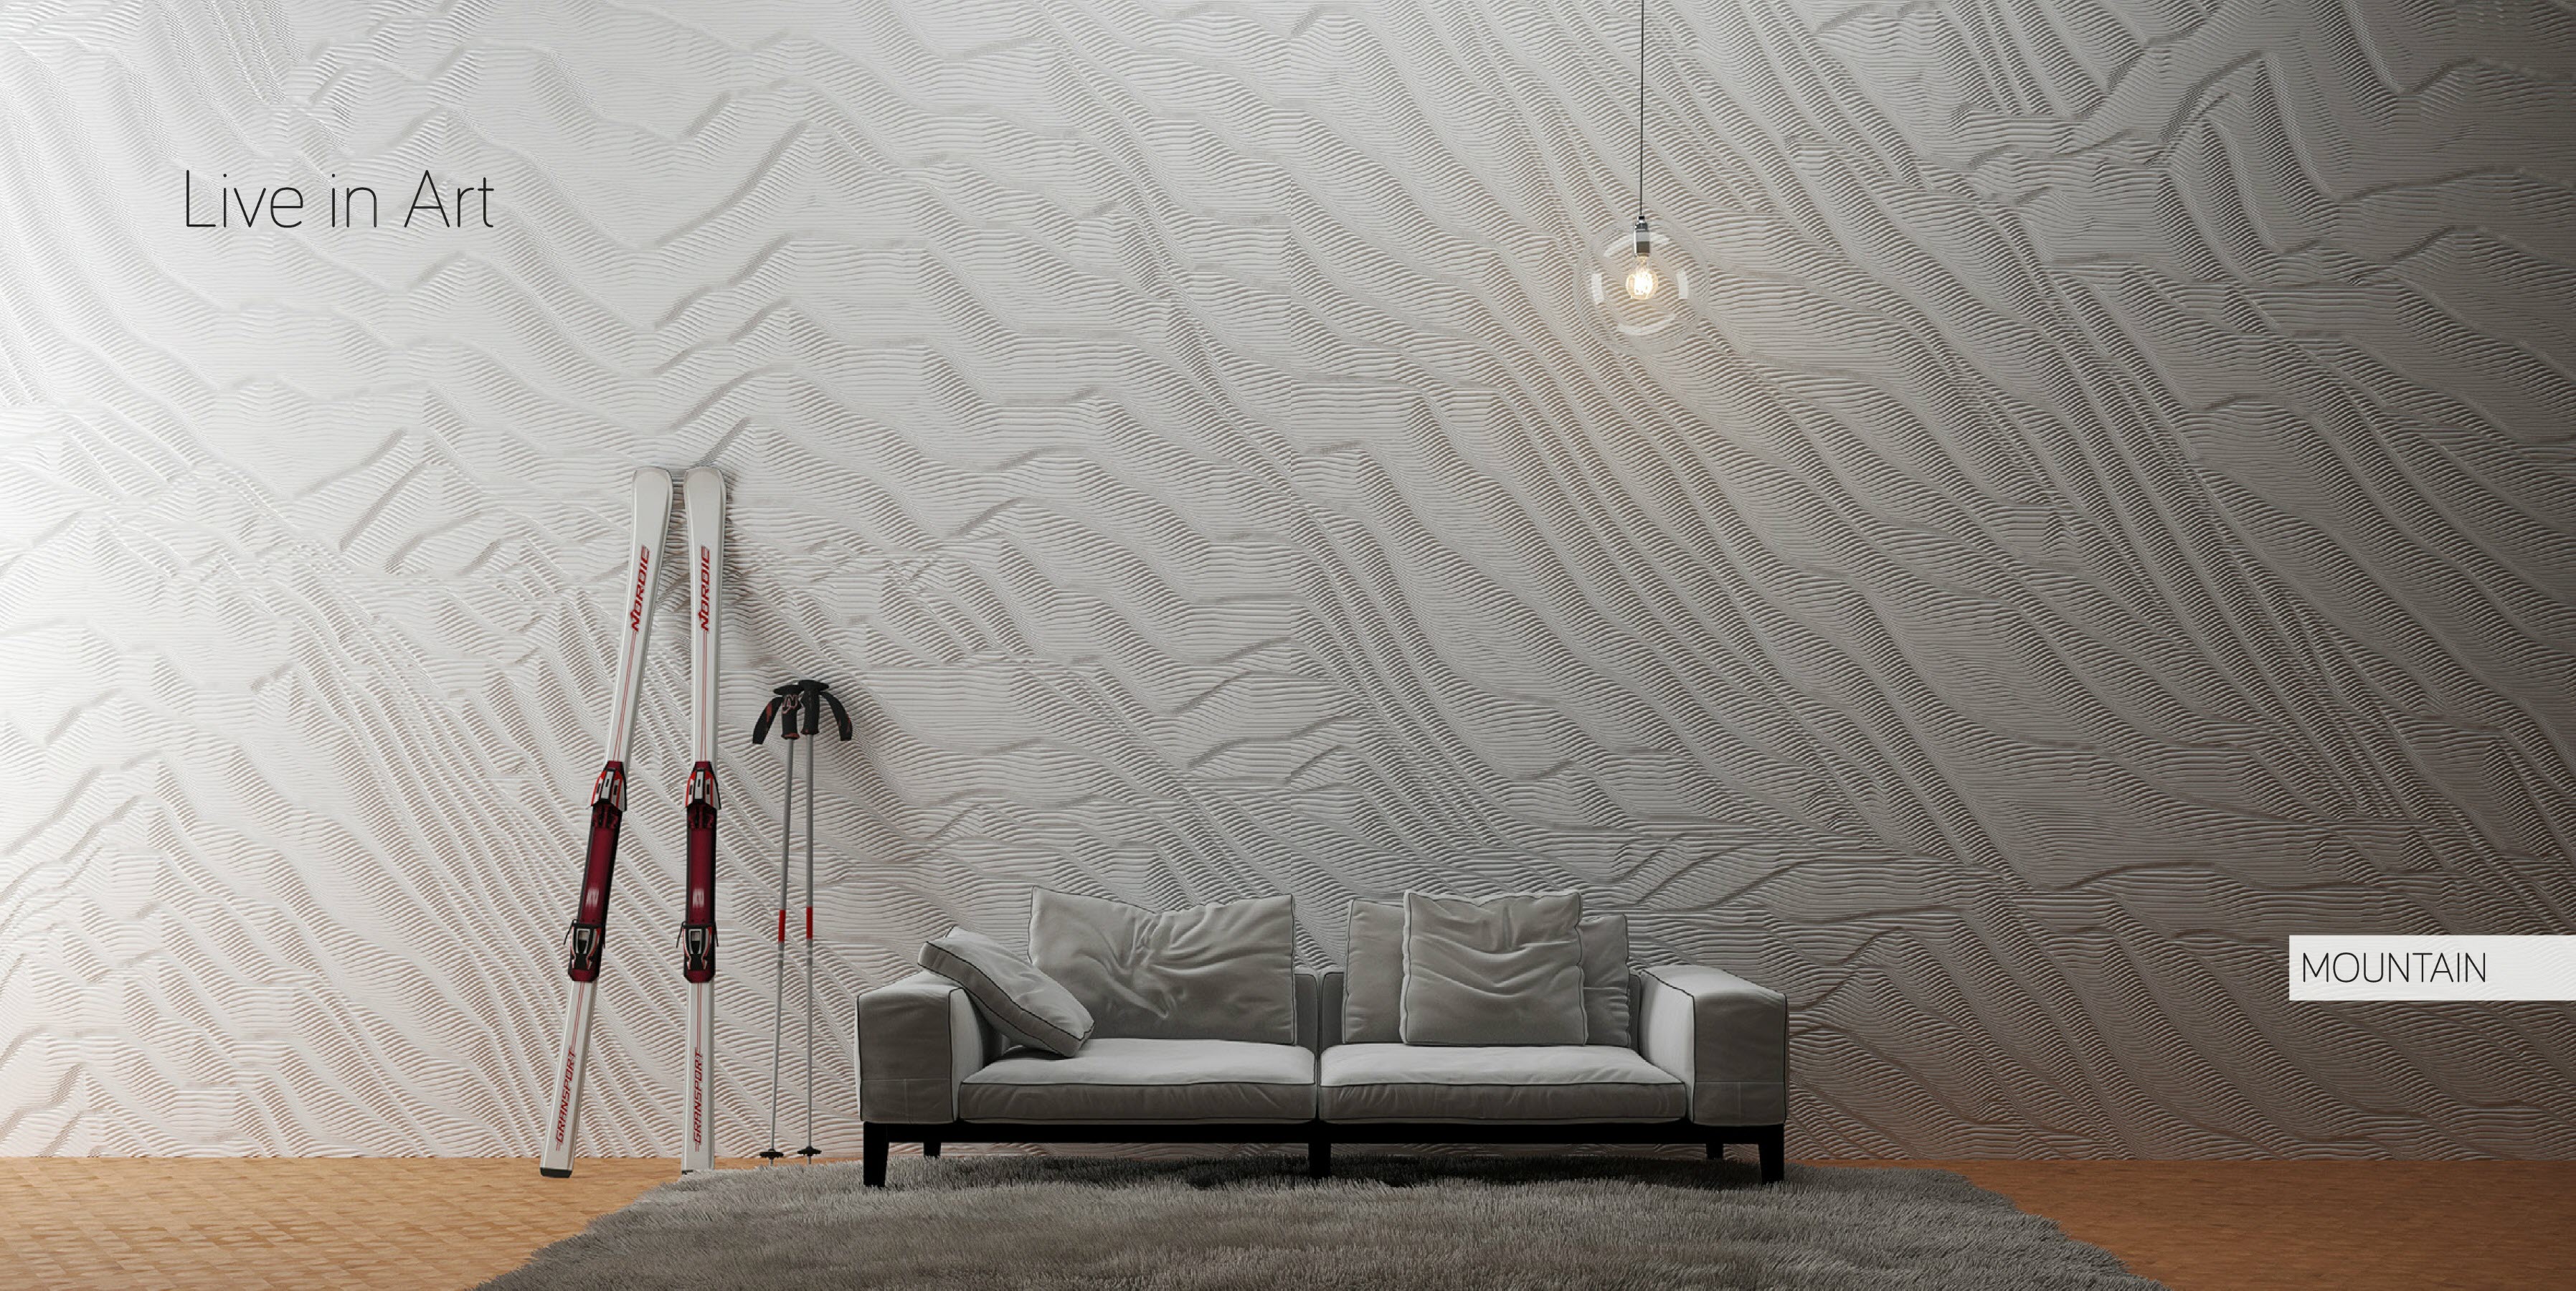 "MOUNTAIN" custom solid surface wall by artist and designer Mario Romano (M.R. Walls).